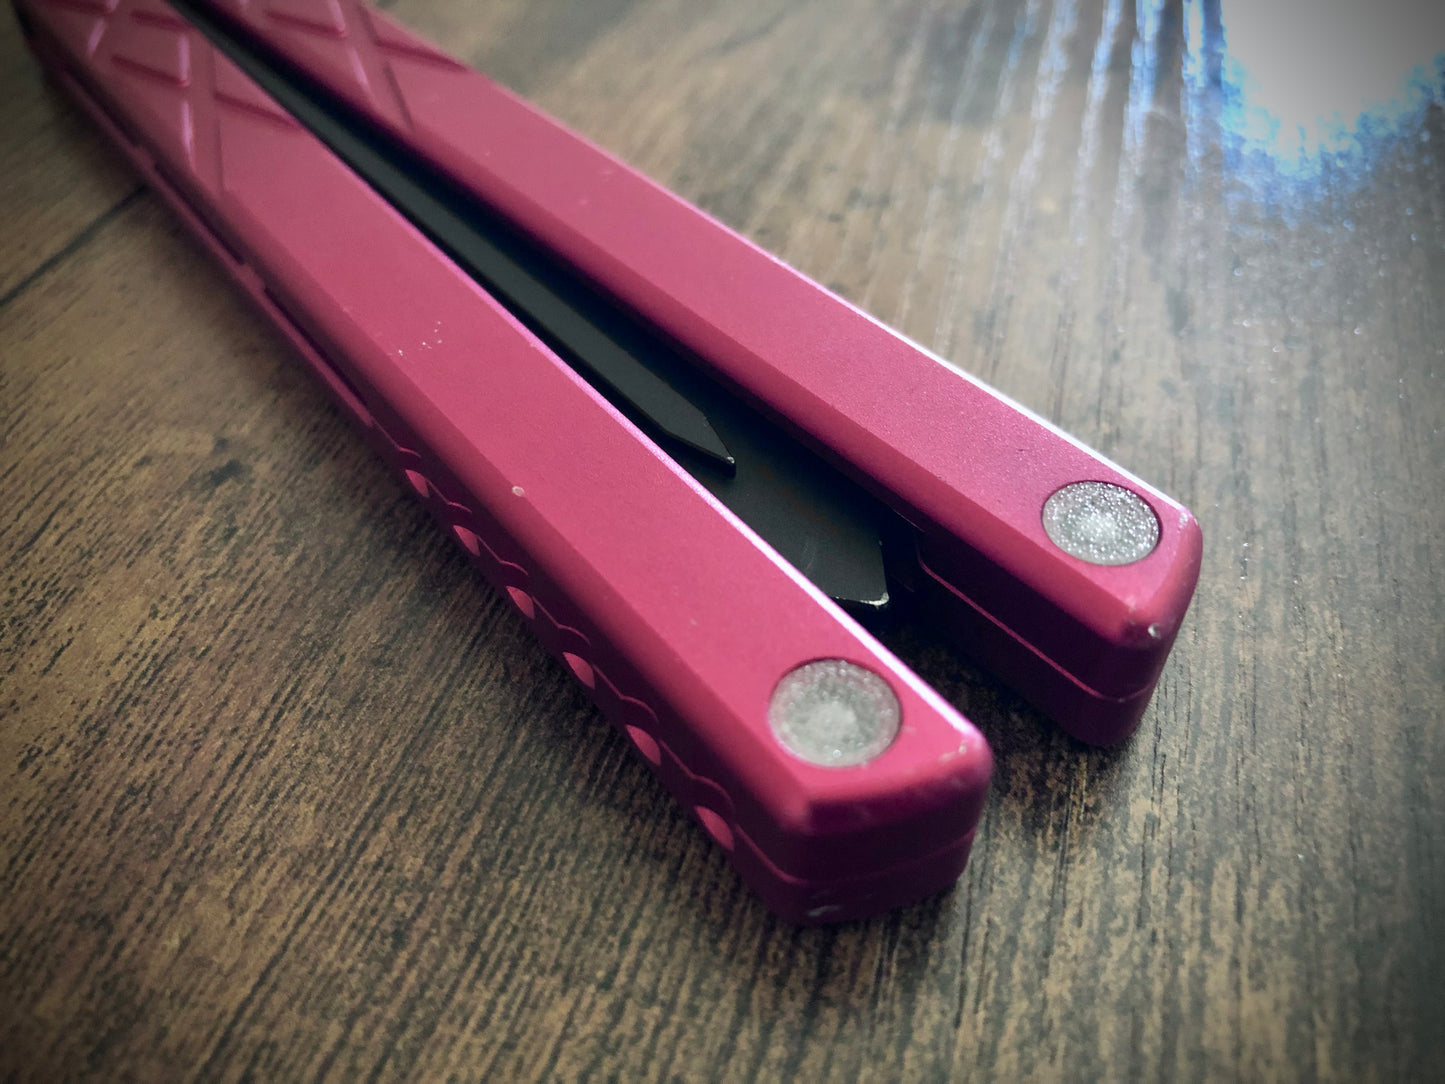 Reduce the handle bias of balisongs that accept 3/16" sexbolts at the base of the handles. This mod replaces the metal sexbolts at the base of the handles with featherweight, shatter-proof polyurethane sexbolts to reduce end-weight and modify the weight distribution of your balisong. 